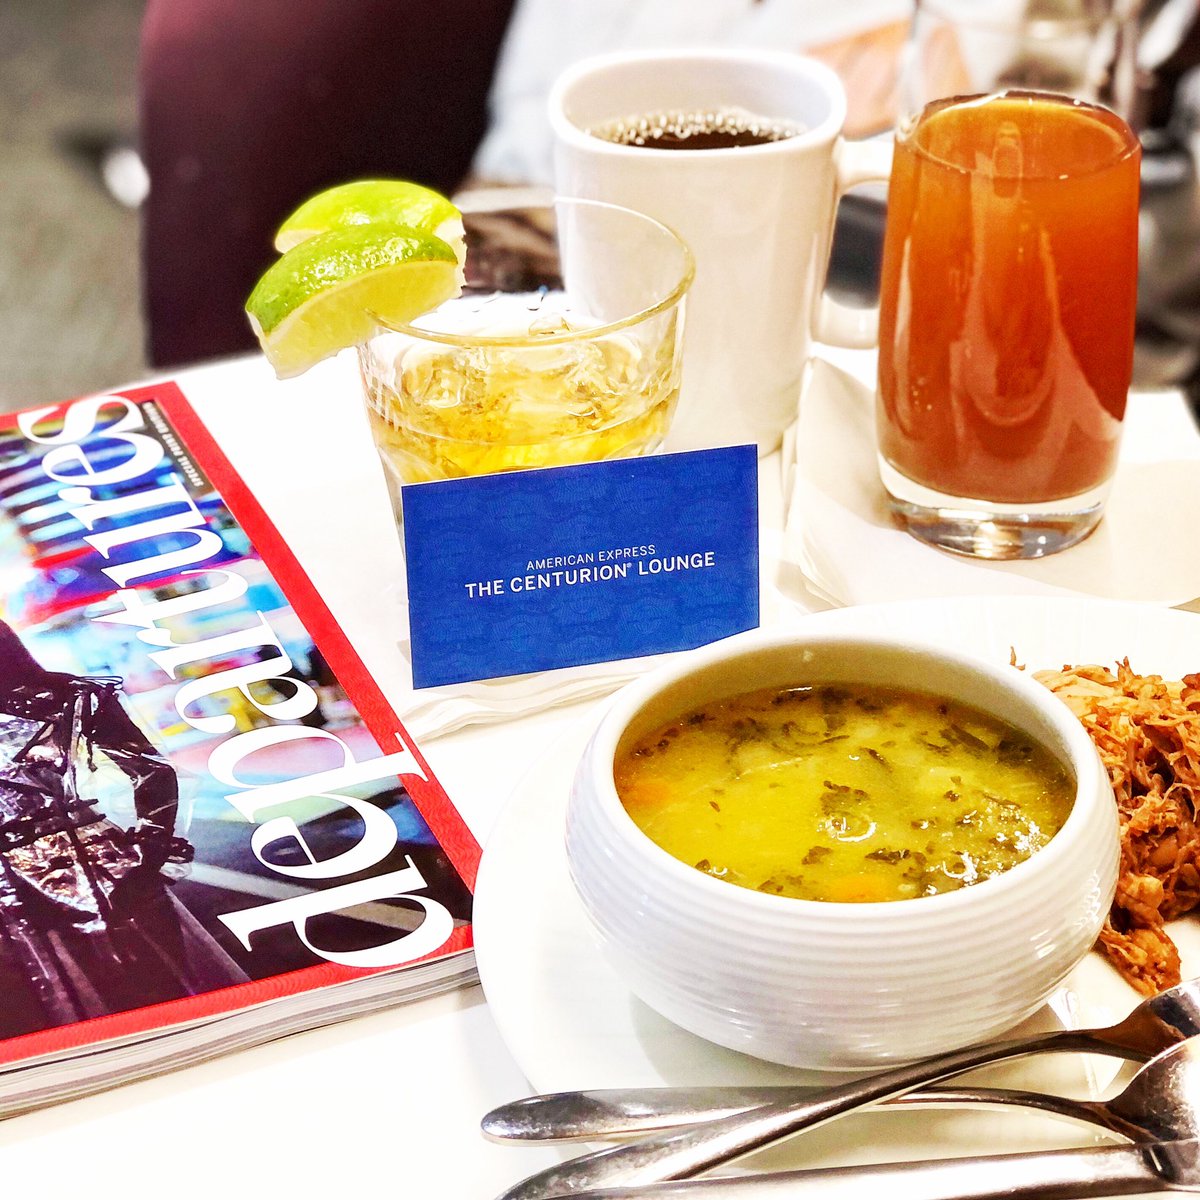 Getting Right Before The Flight…
#travel #explore #passport #food #whiskey #amexlife #americanexpress #amex #skymileslife #travelblogger #frequentflyer #airportlife #dfwairport #dallas #texas